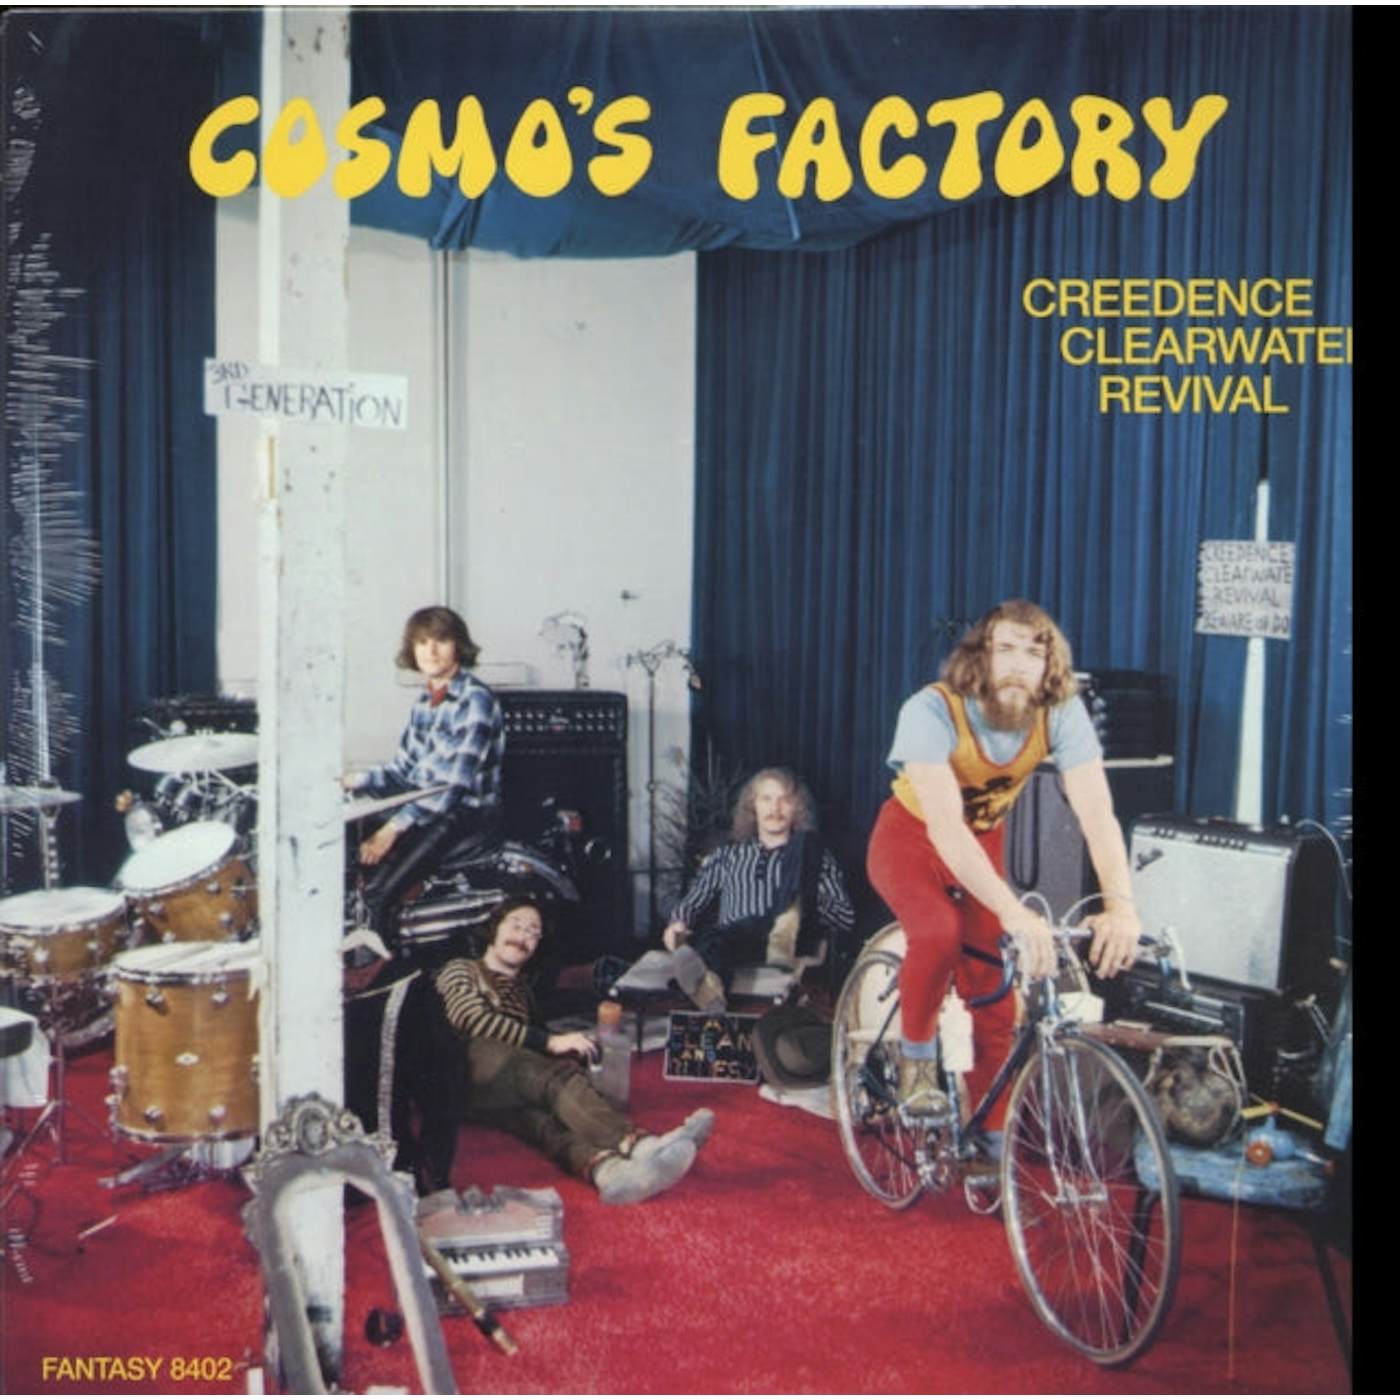 Creedence Clearwater Revival LP Vinyl Record - Cosmo's Factory